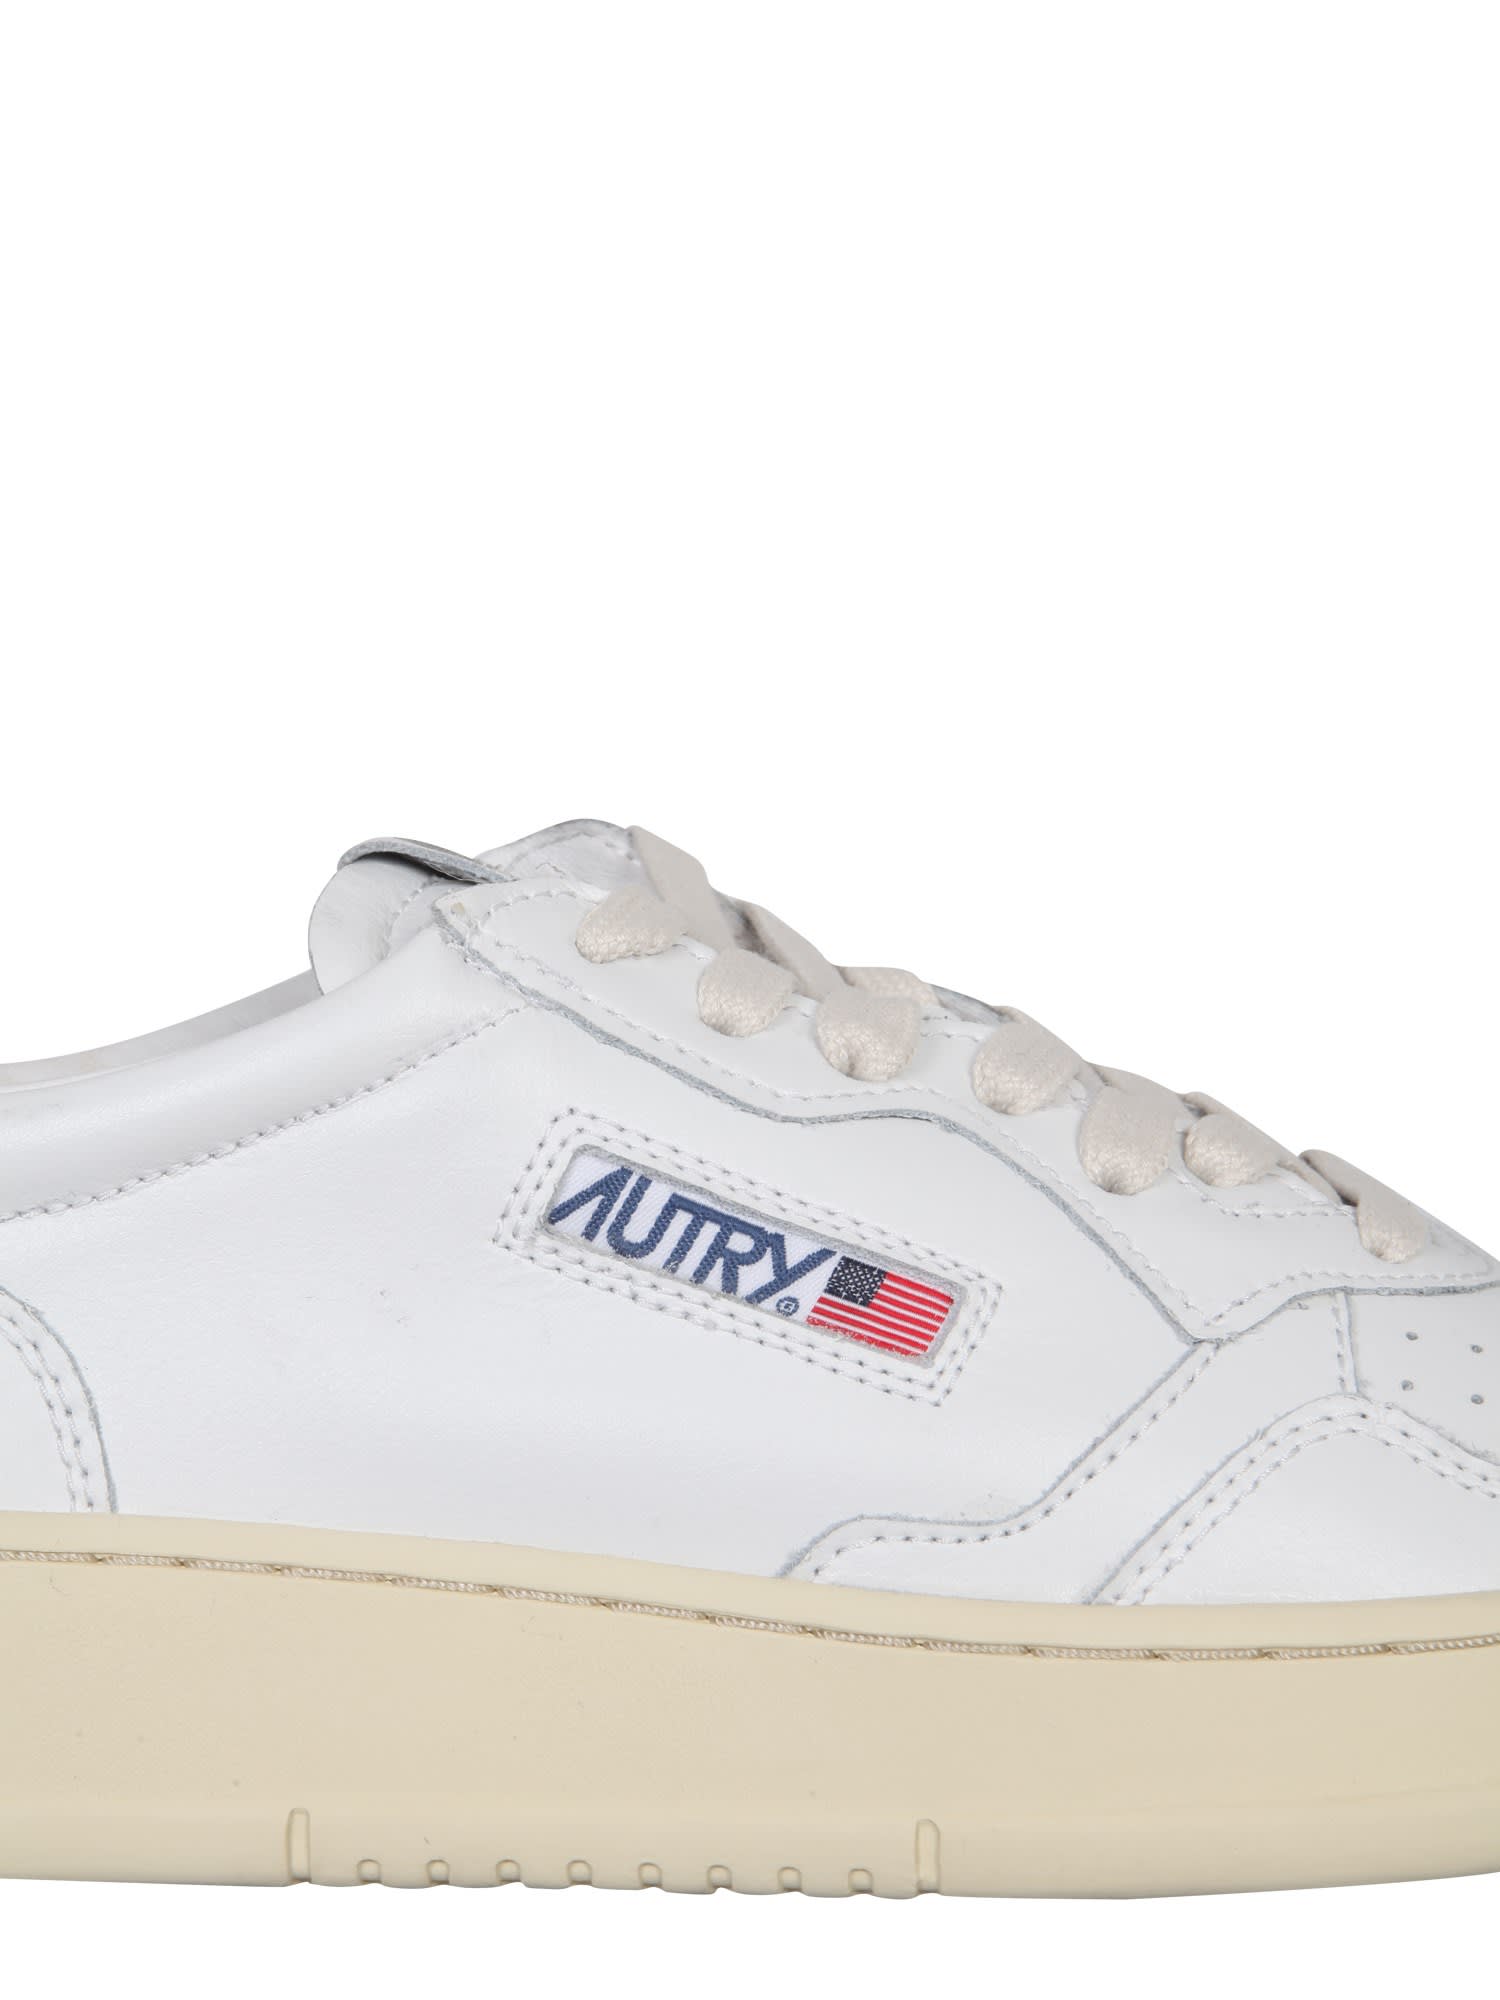 Shop Autry Leather Sneakers